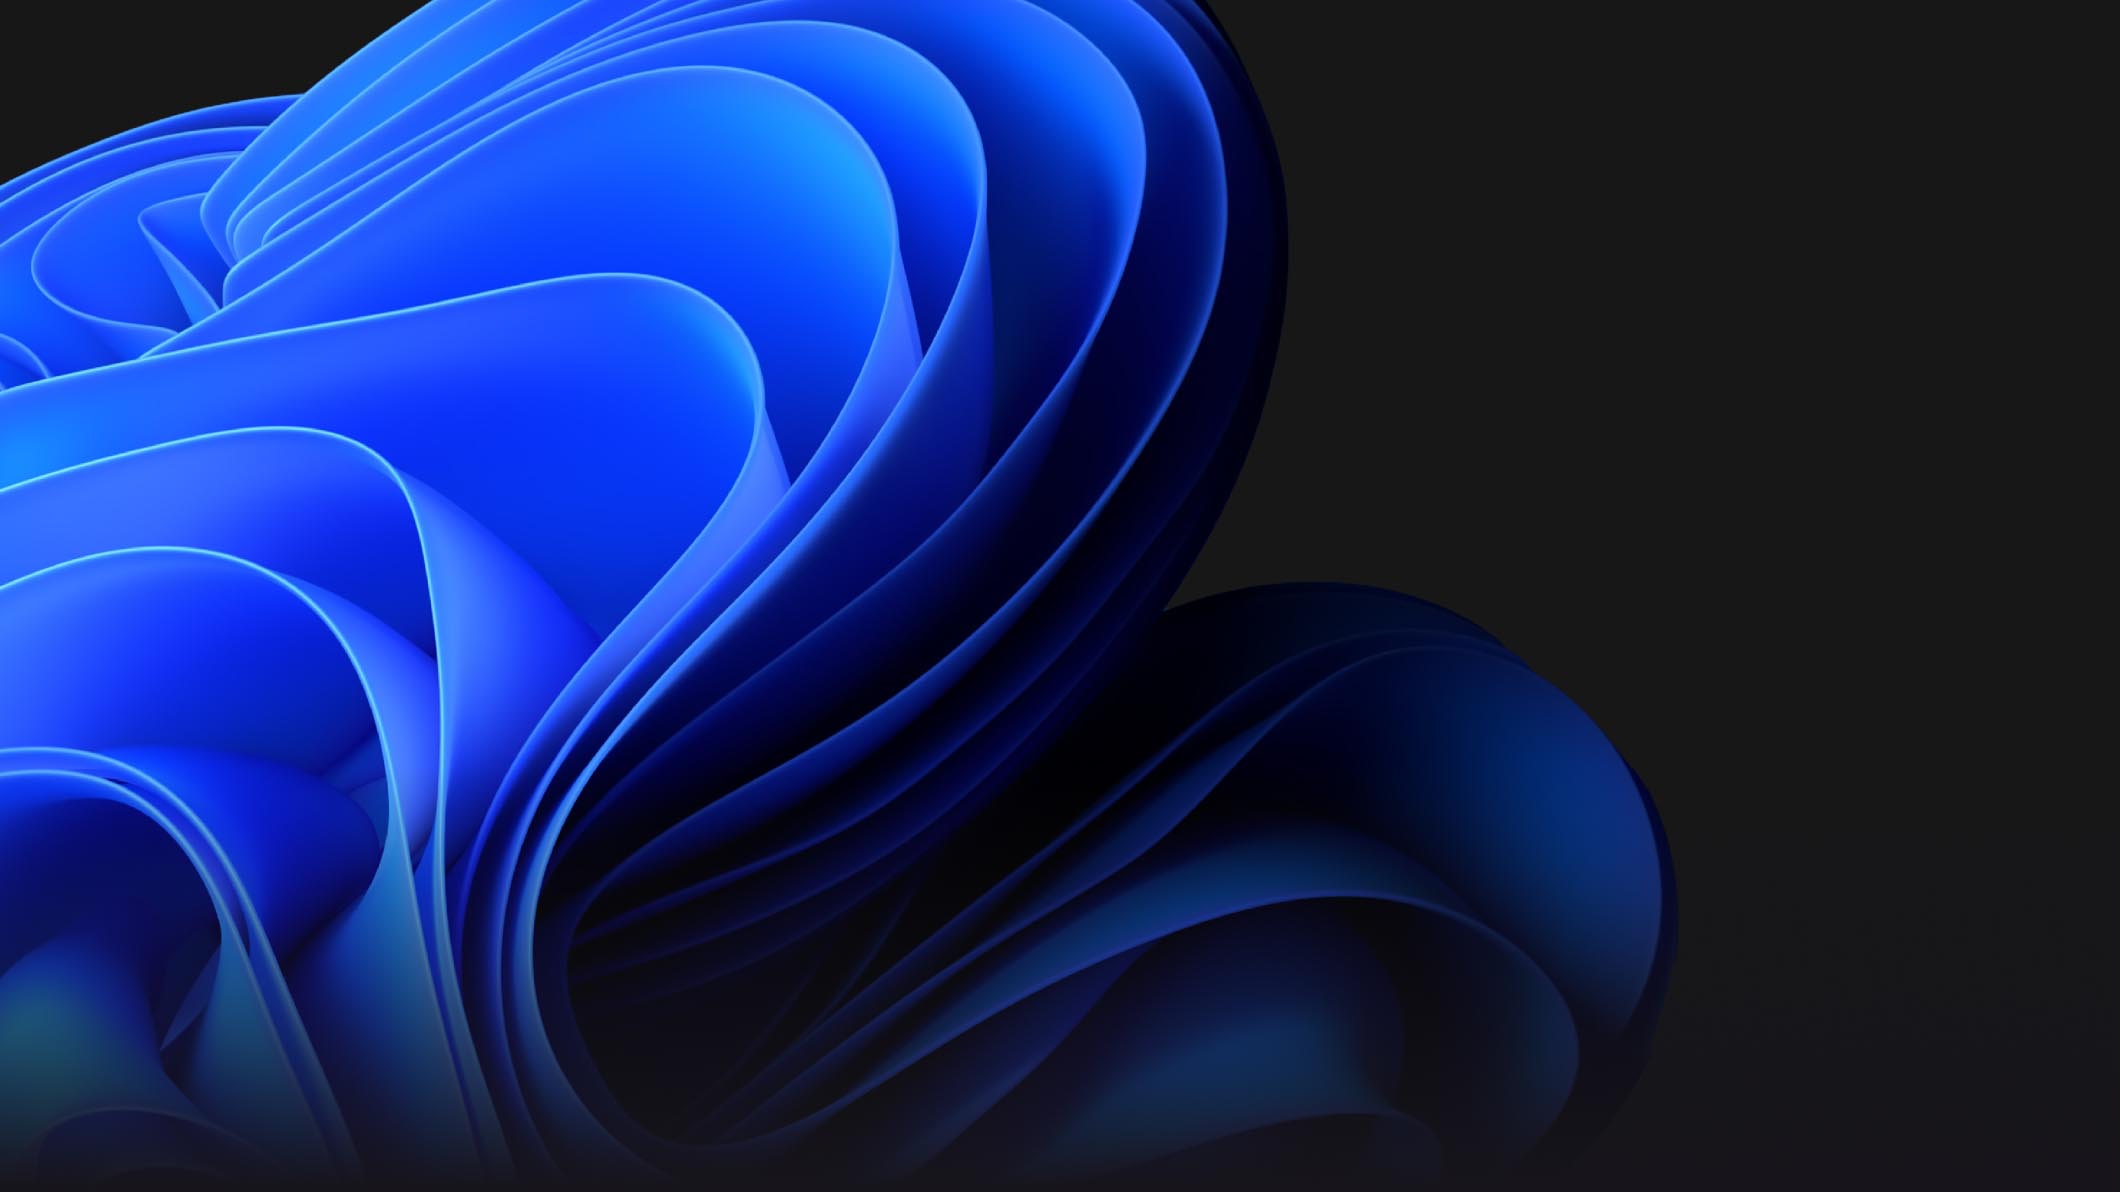 An abstract blue shape with multiple layers against a black background